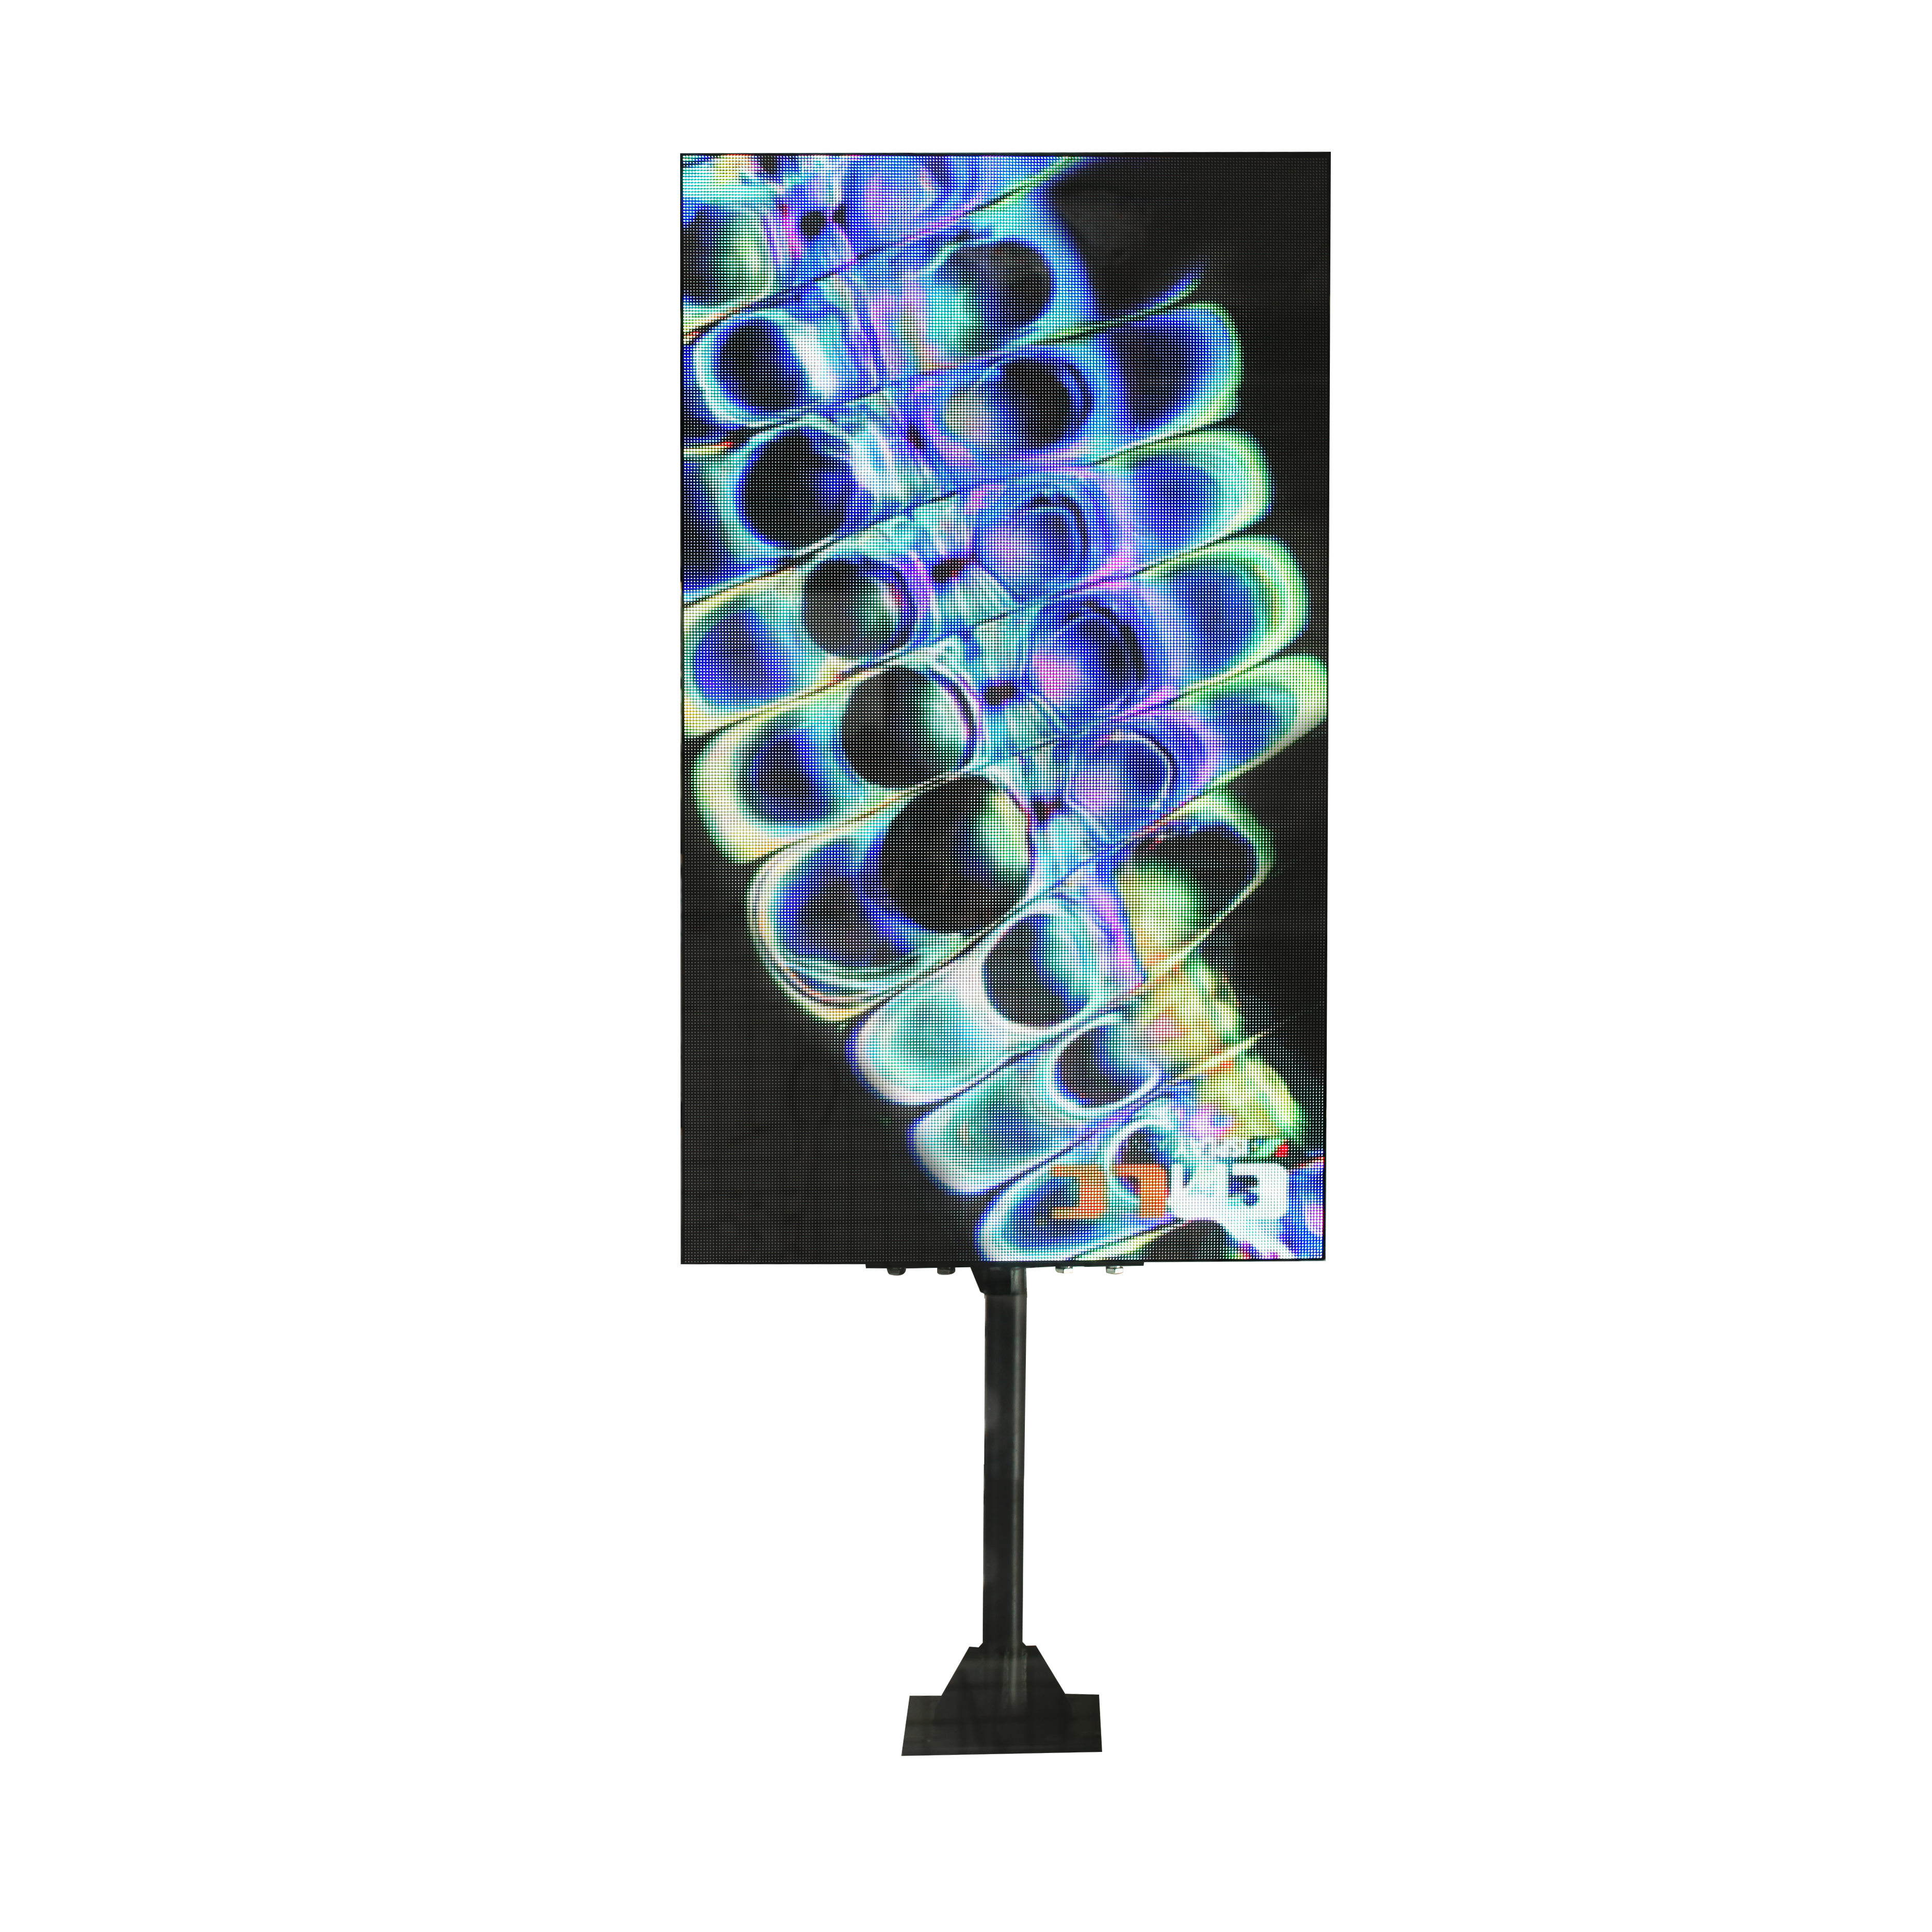 LED totem display for retail store window